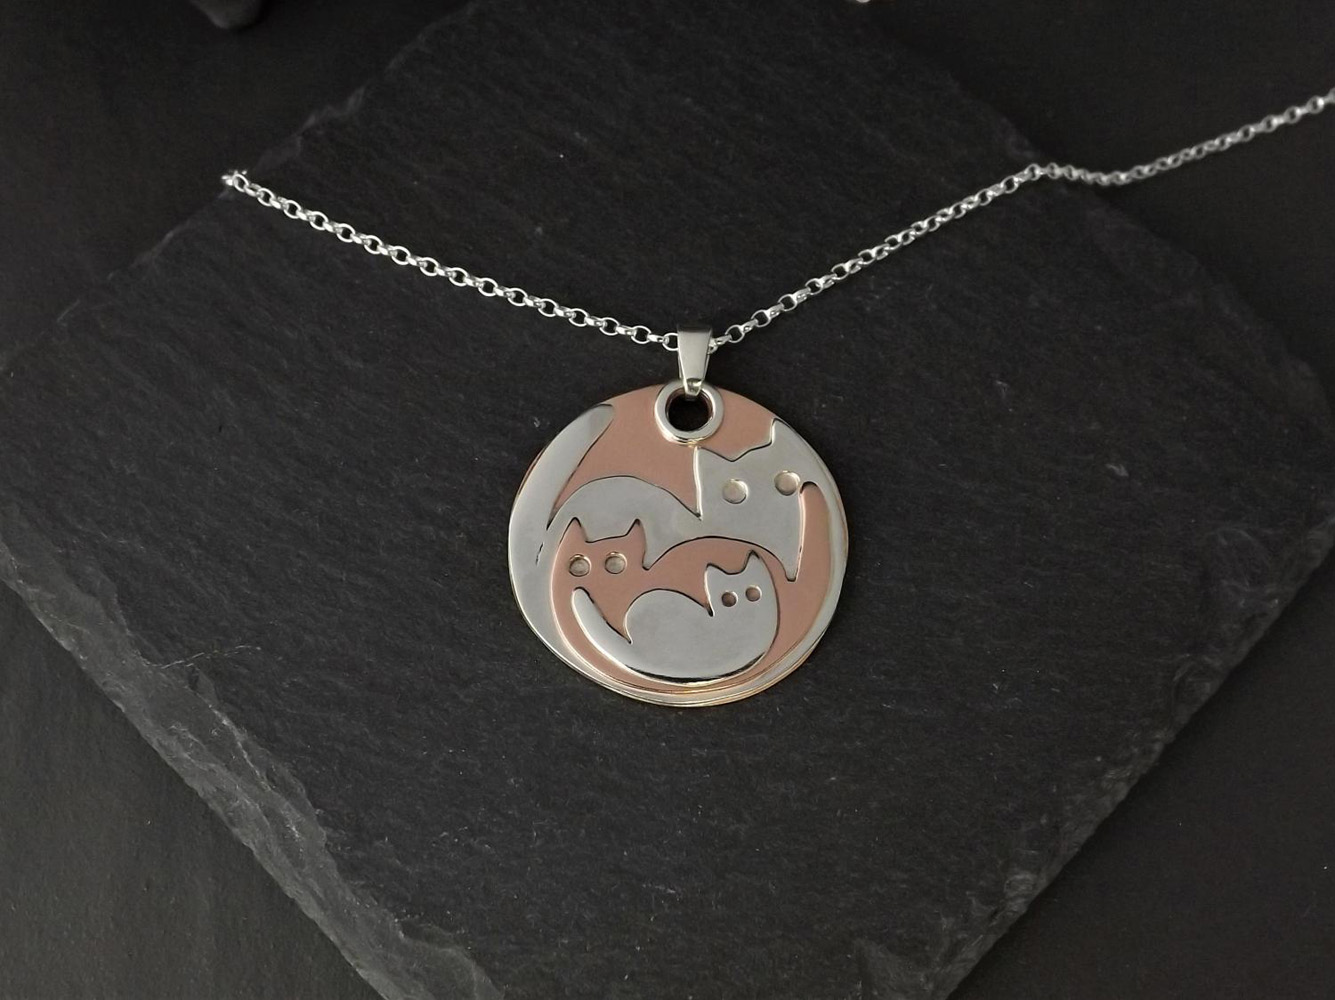 Cat Family Necklace, Handmade Silver and Copper Cat Pendant on Chunky 20 inch Chain